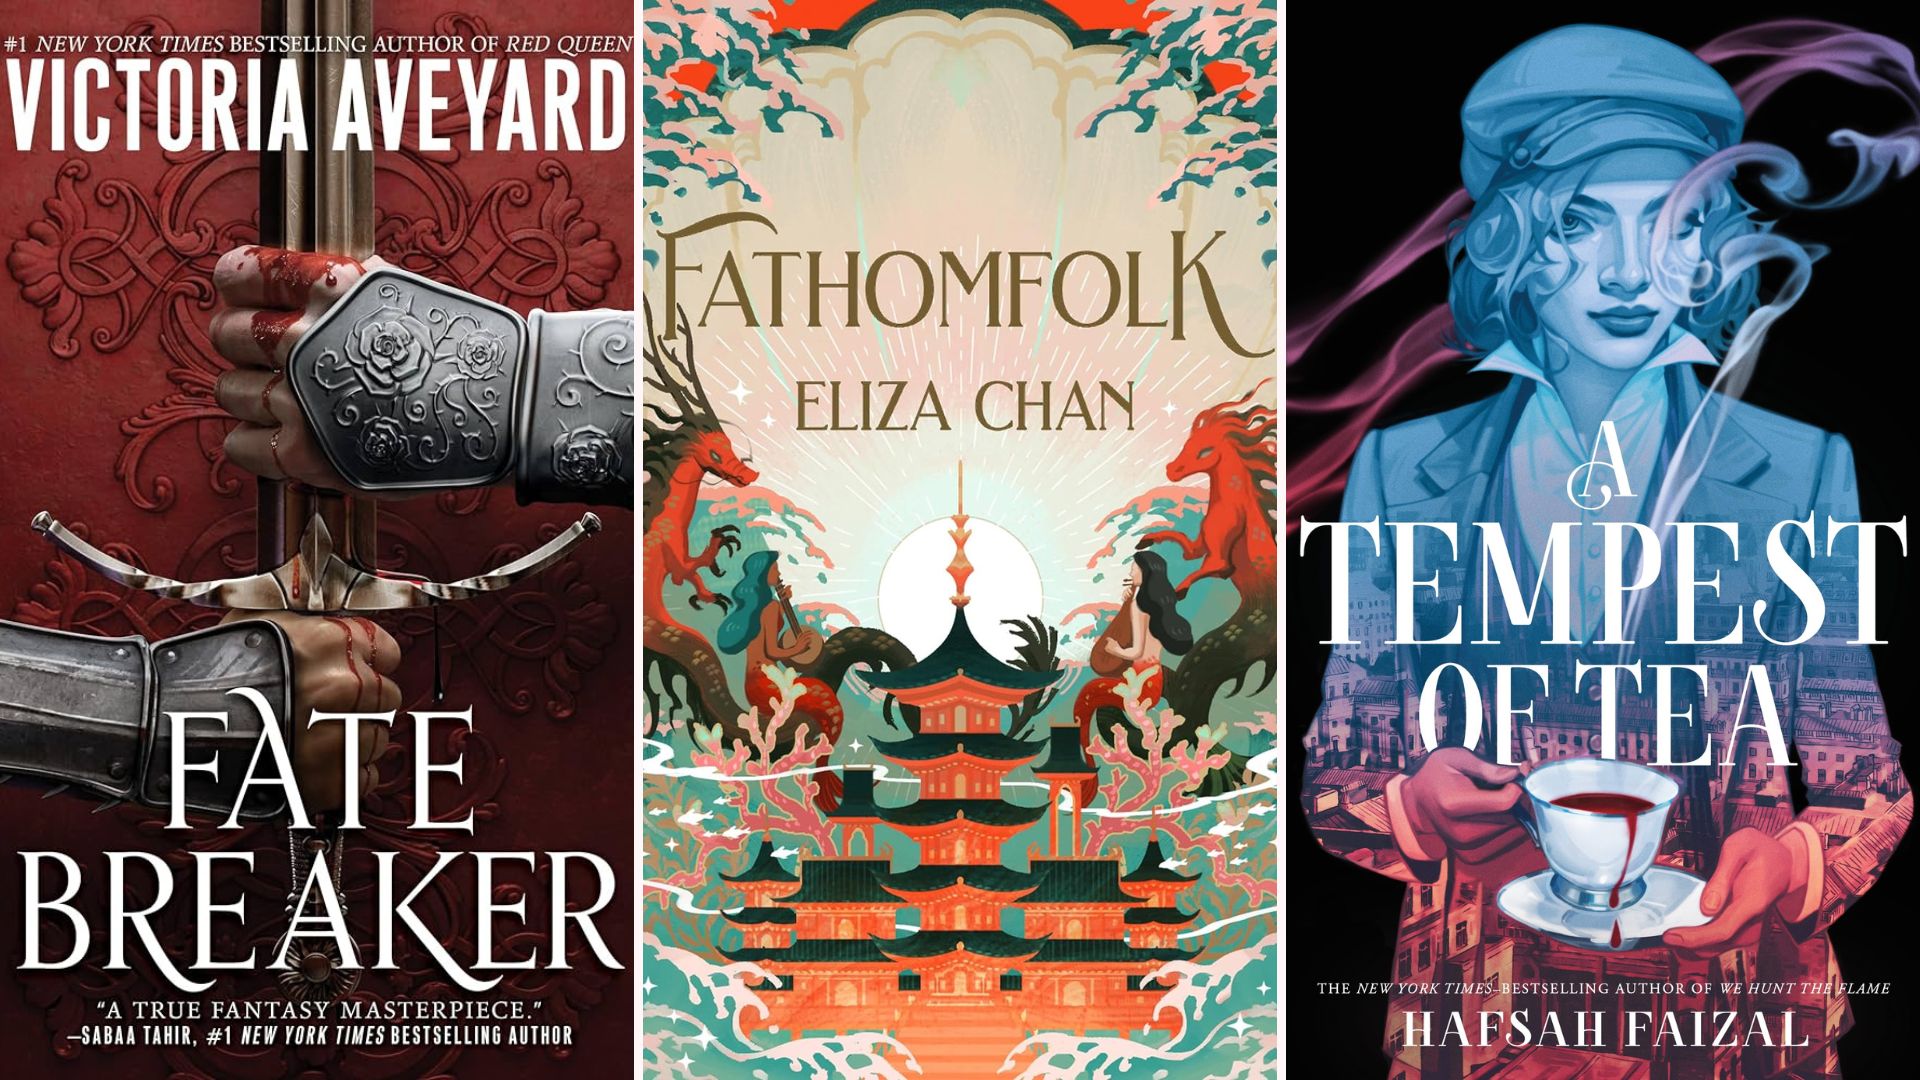 Trifold image of book covers for Best Fantasy Books of February 2024: Fate Breaker, Fathomfolk, and A Tempest of Tea